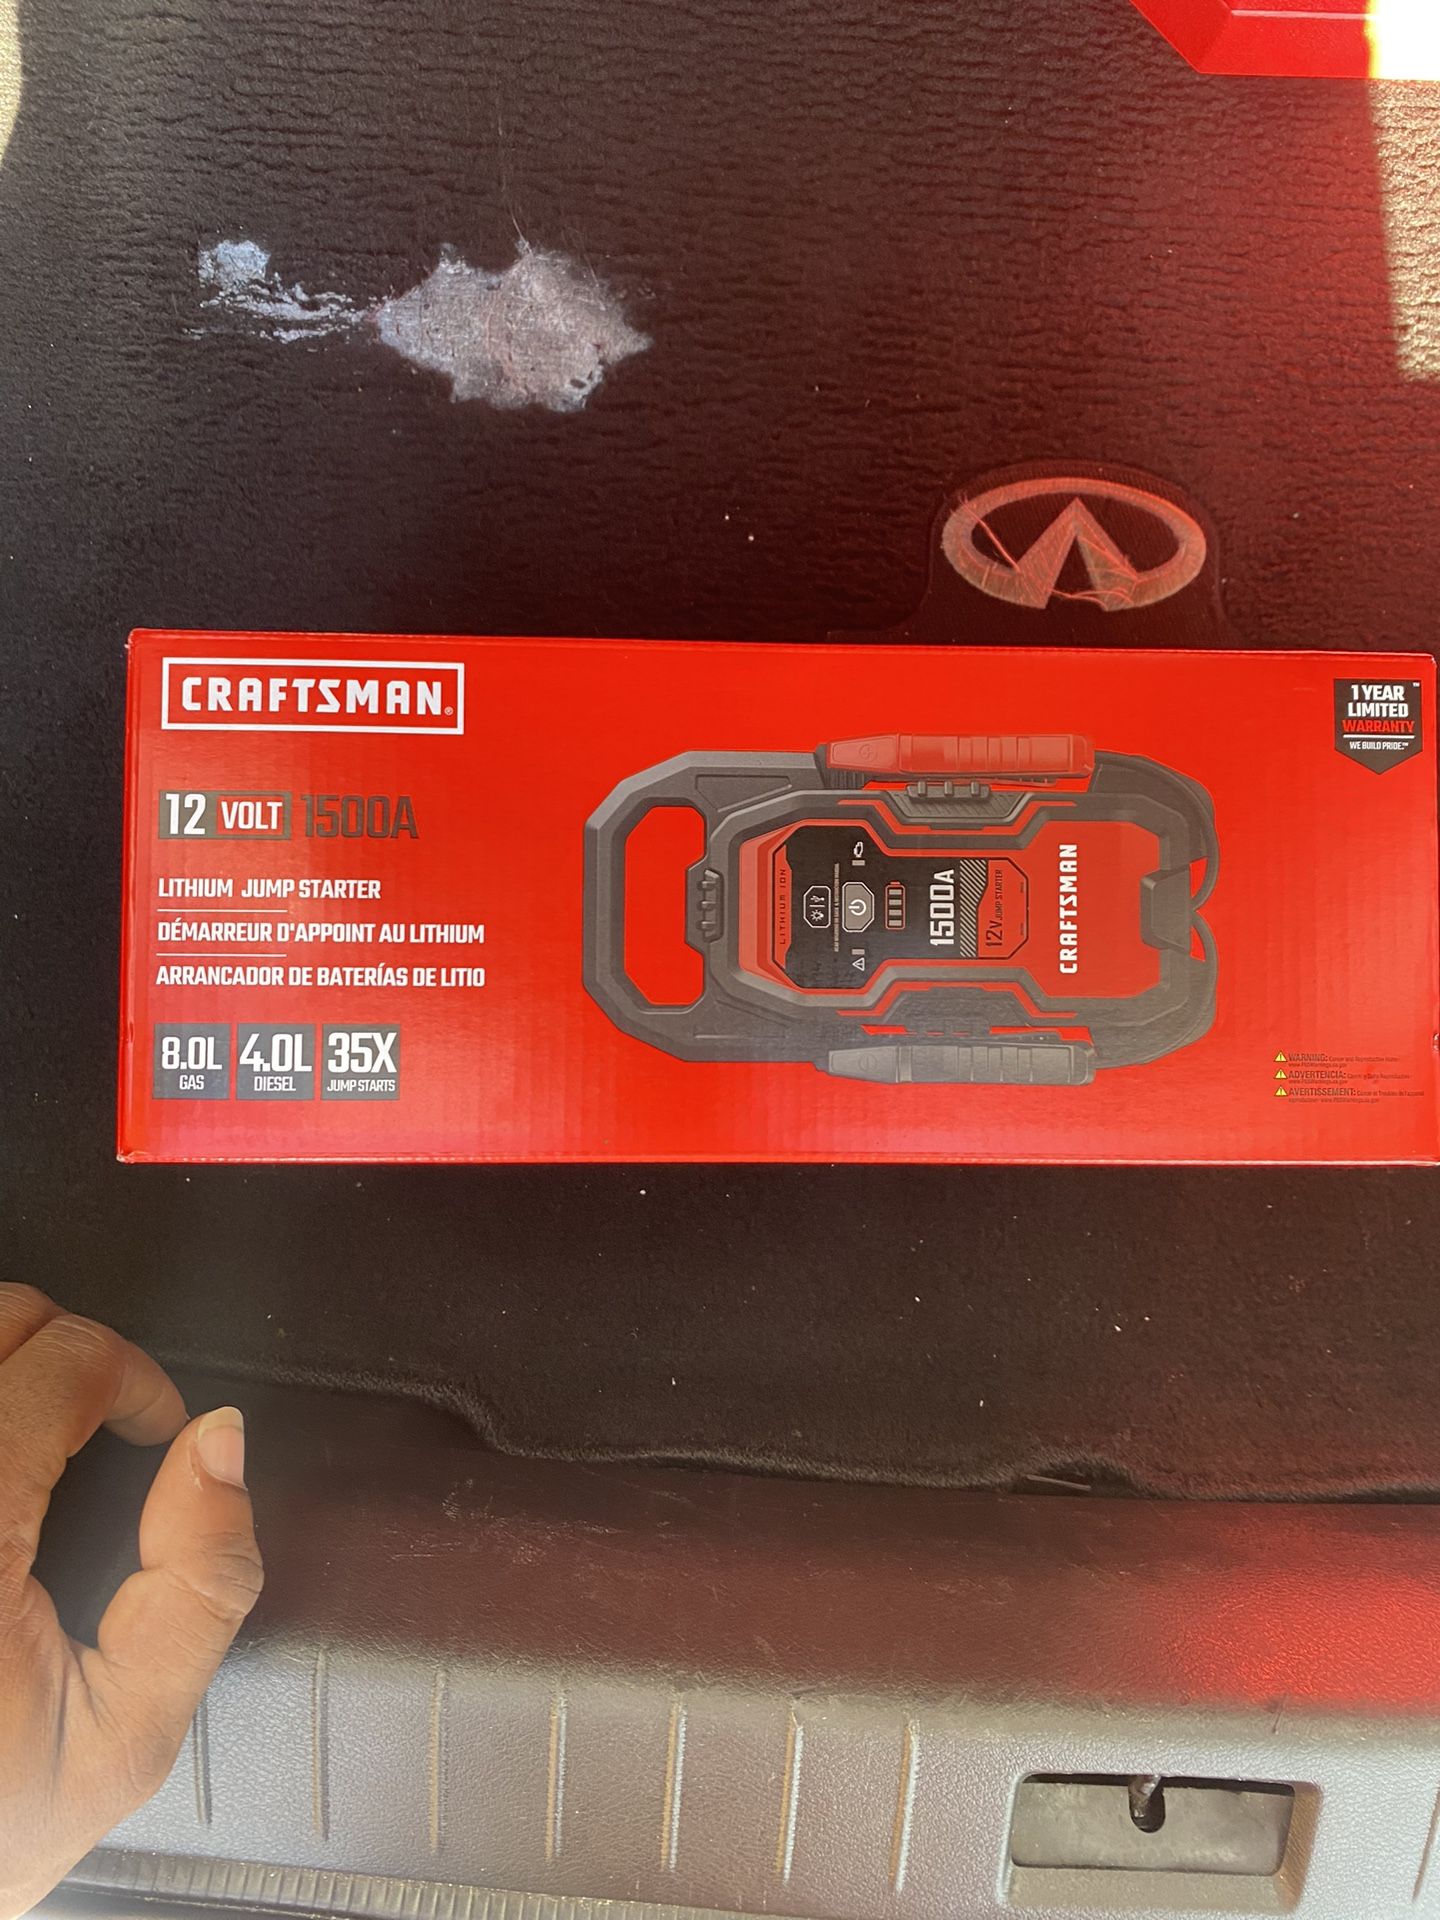 Battery Charger Brand New